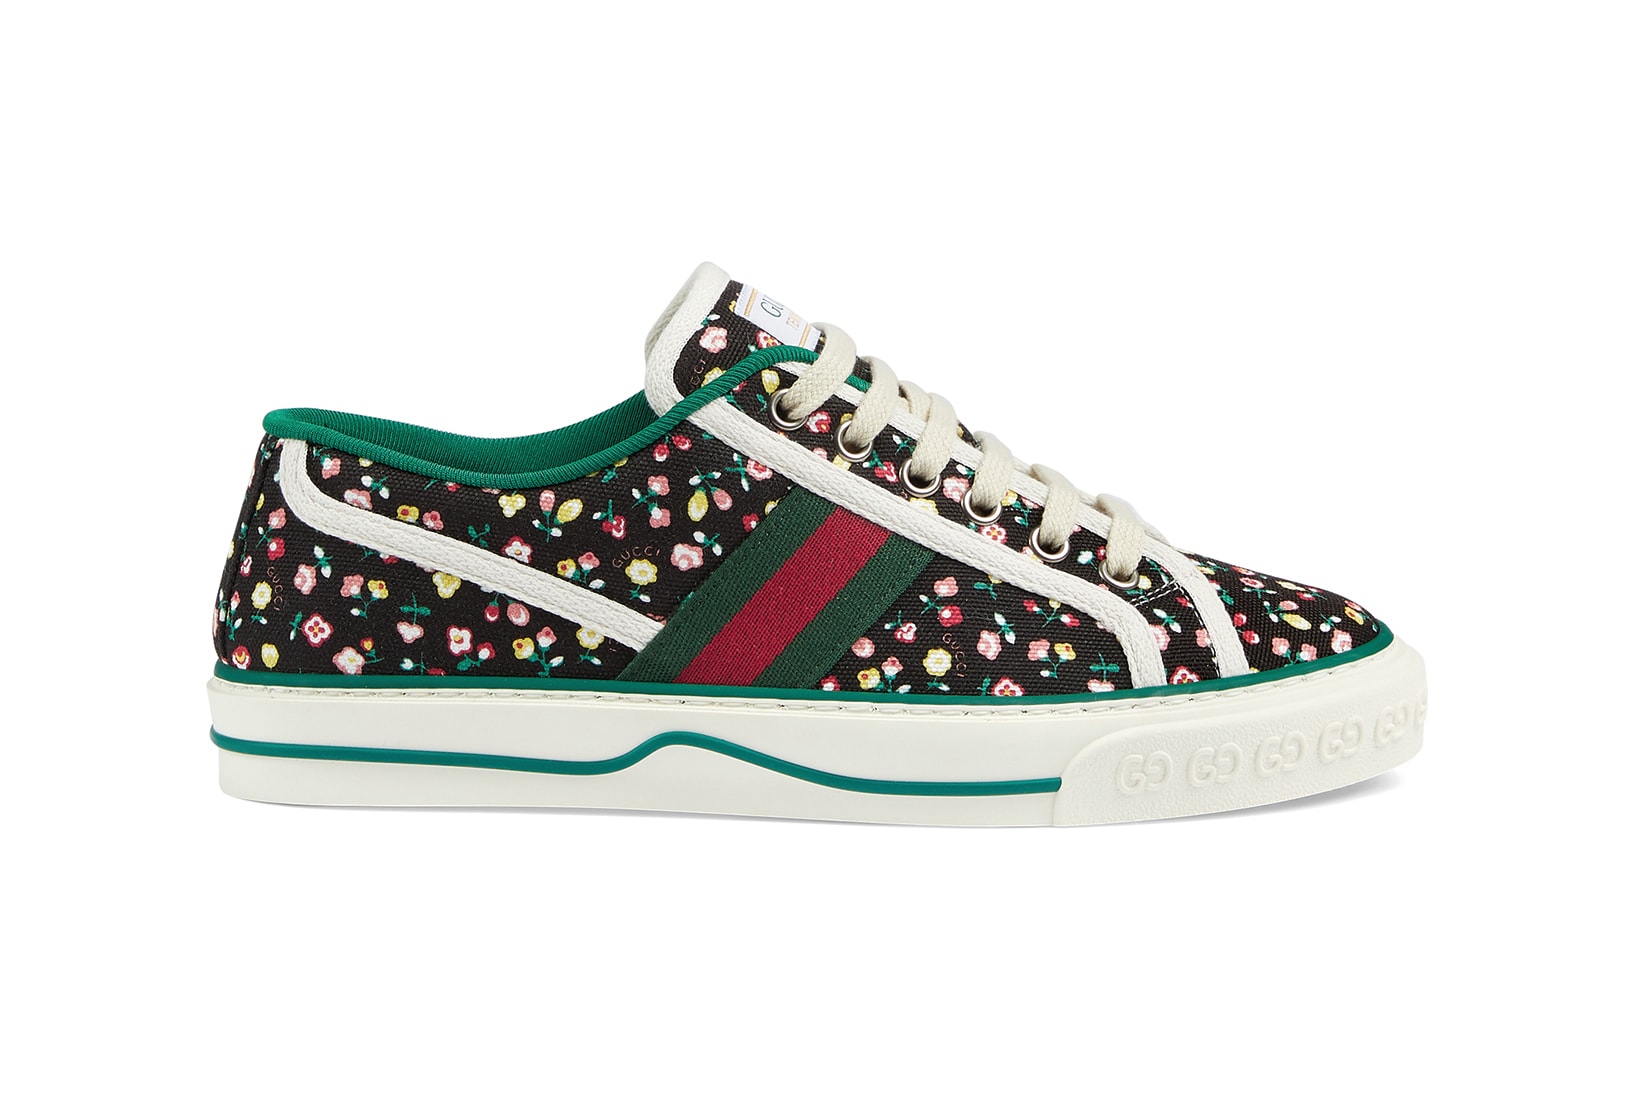 Liberty London x Gucci Collaboration Fall/Winter 2020 Collection Puffer Jacket Sneakers High Top Black